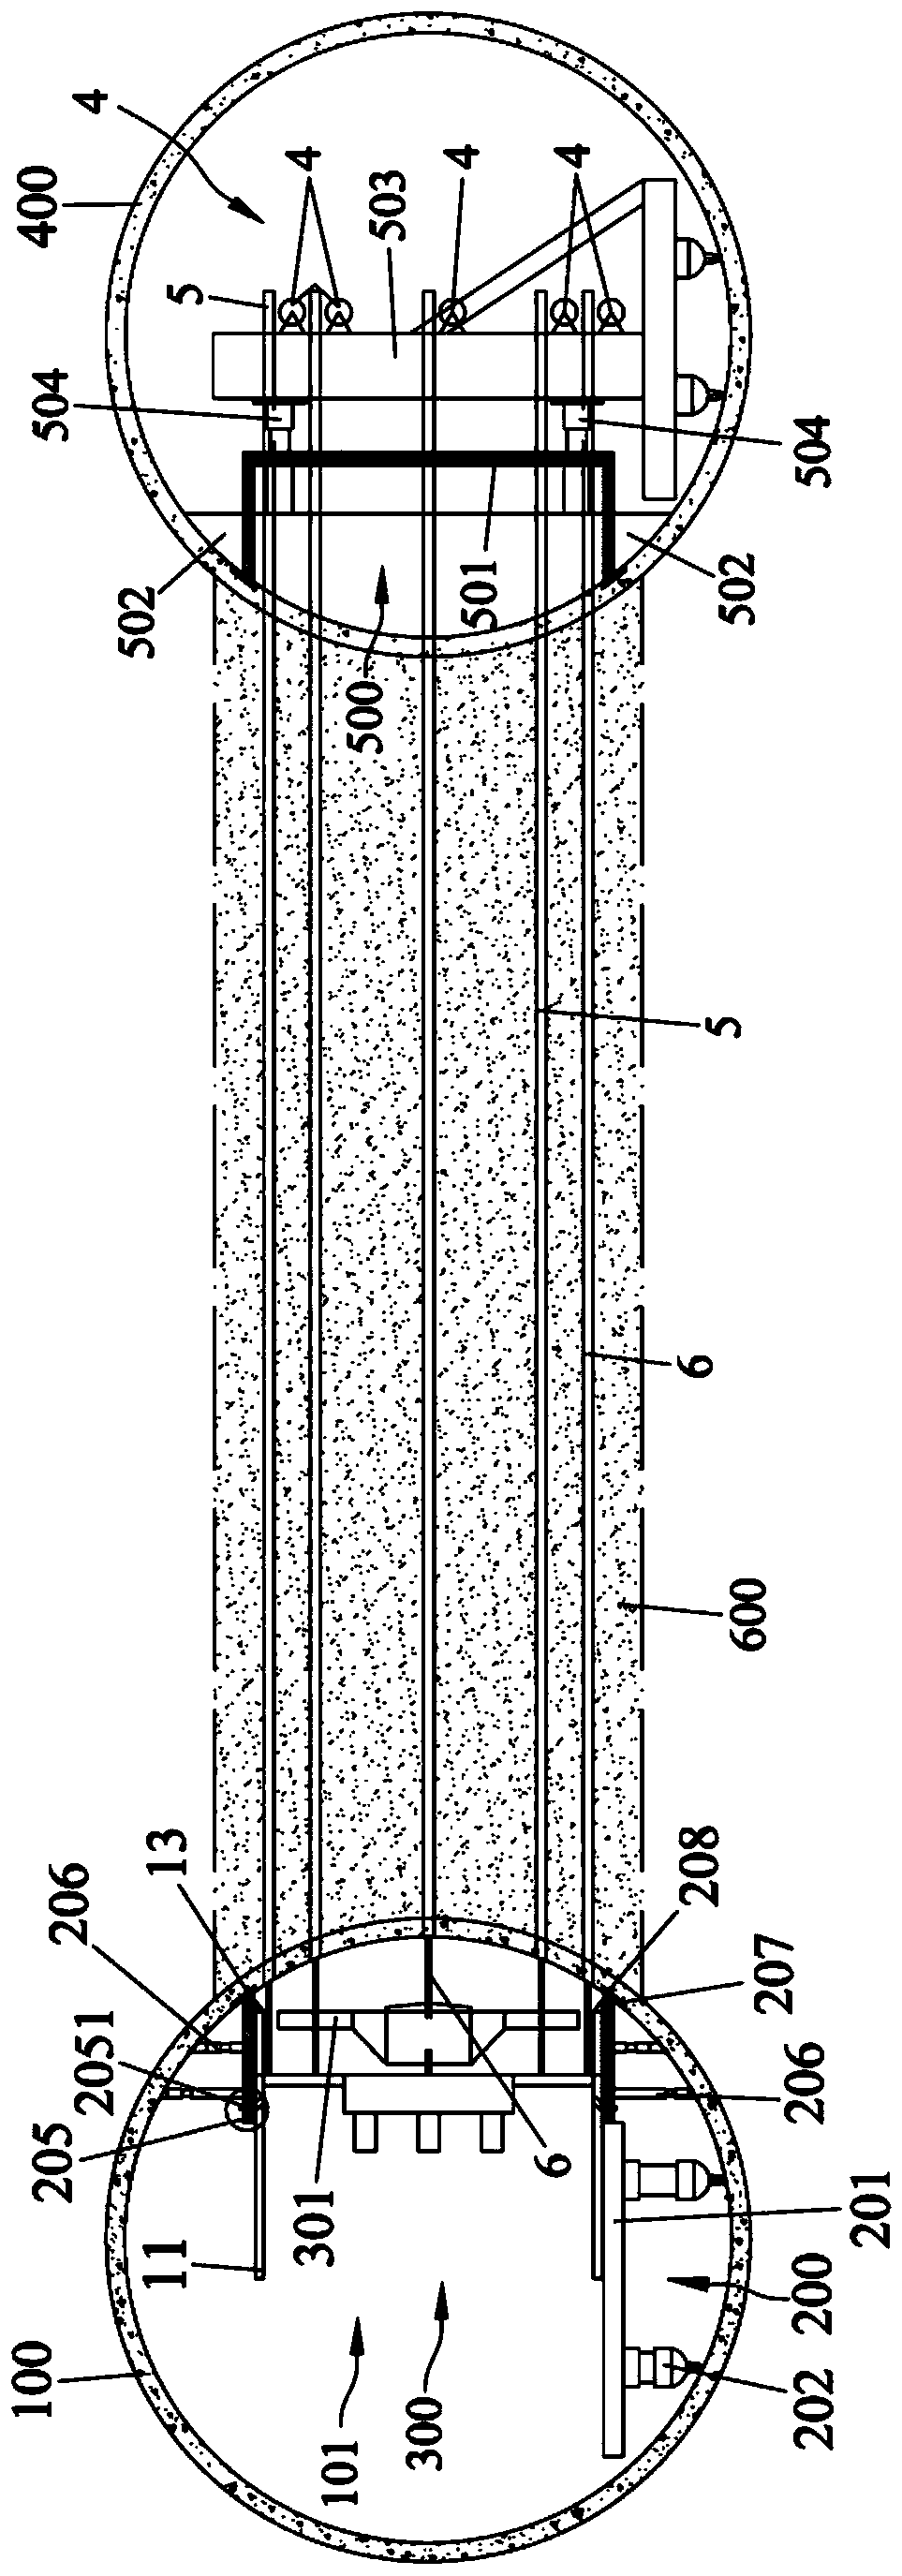 Shield construction method of contact channel